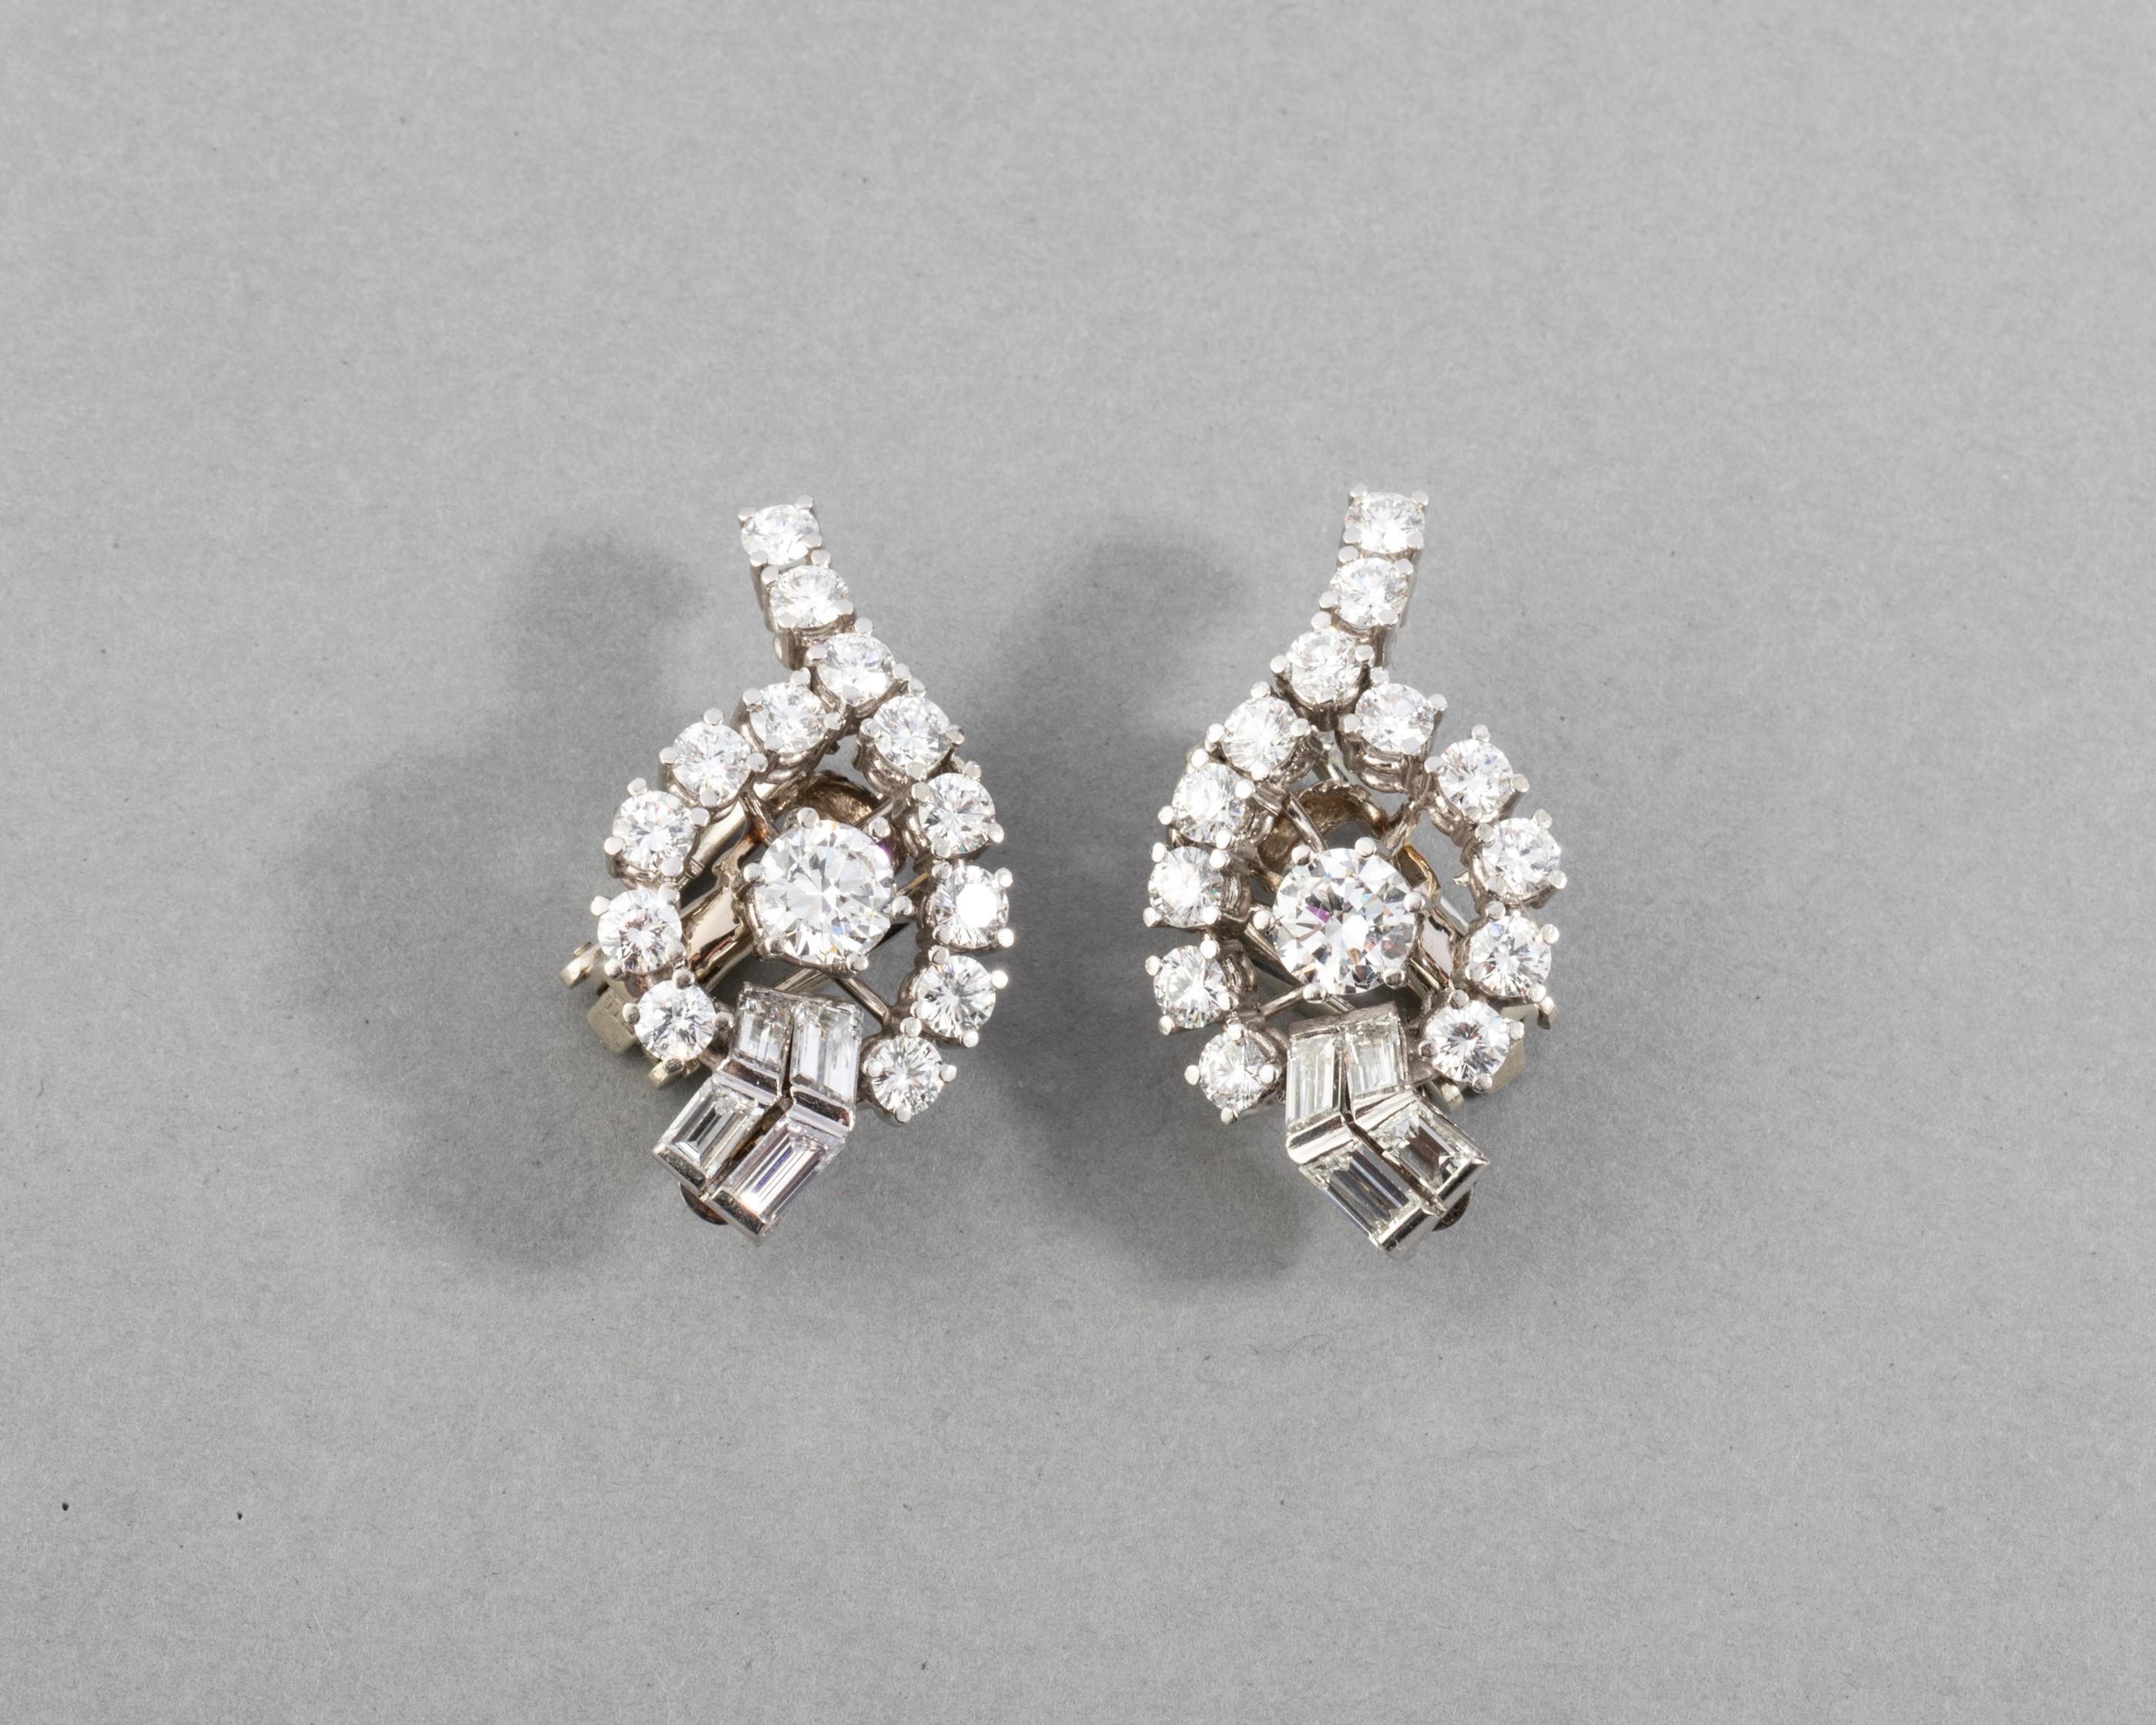 4.40 Carats Diamonds French Vintage Earrings Clip
Very beautiful pair of diamonds earrings, made in France circa 1960.
The two principal diamonds weights 0.60 carats each estimate. The diamonds are white and clear, they sparkle a lot. The other